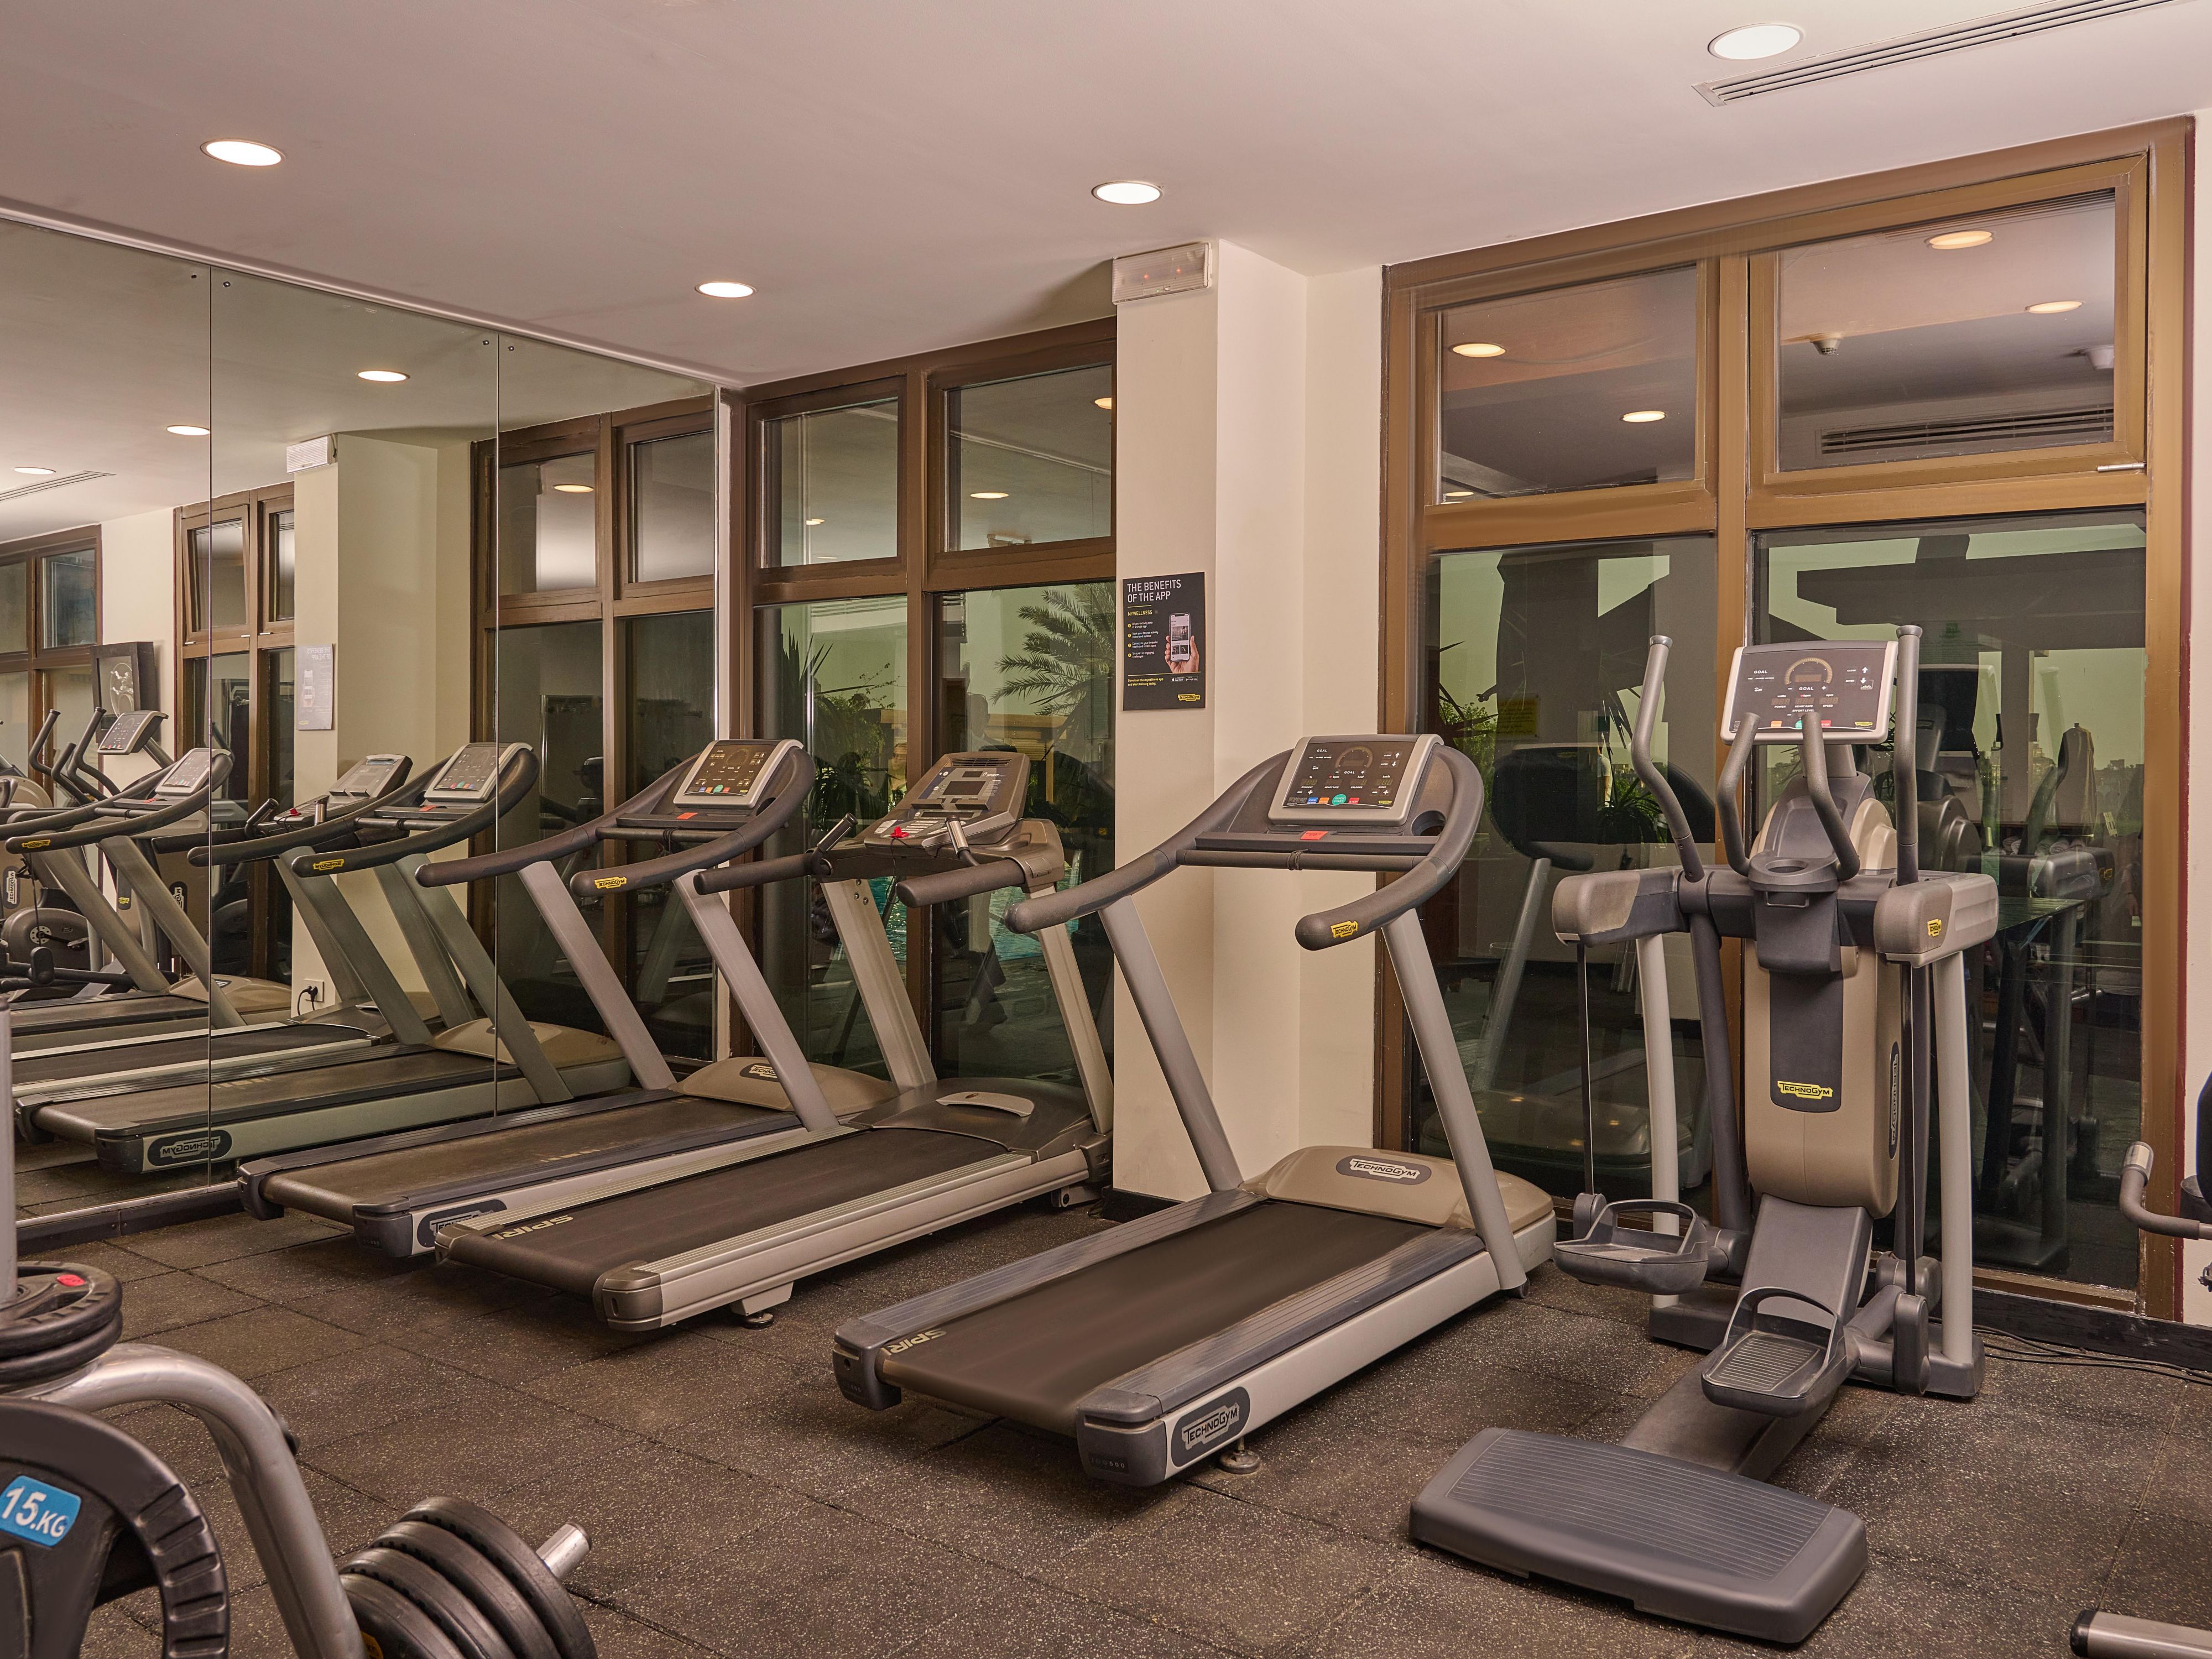 Being on vacation or a business trip doesn't mean that you don't stay fit. Enjoy your stay at Holiday Inn & Suites Cairo Maadi and don't forget to work out at our very own gym that overlooks the magnificent river Nile. The gym is fully equipped with cardio and strength machines. Nothing beats working out with a breathtaking view.